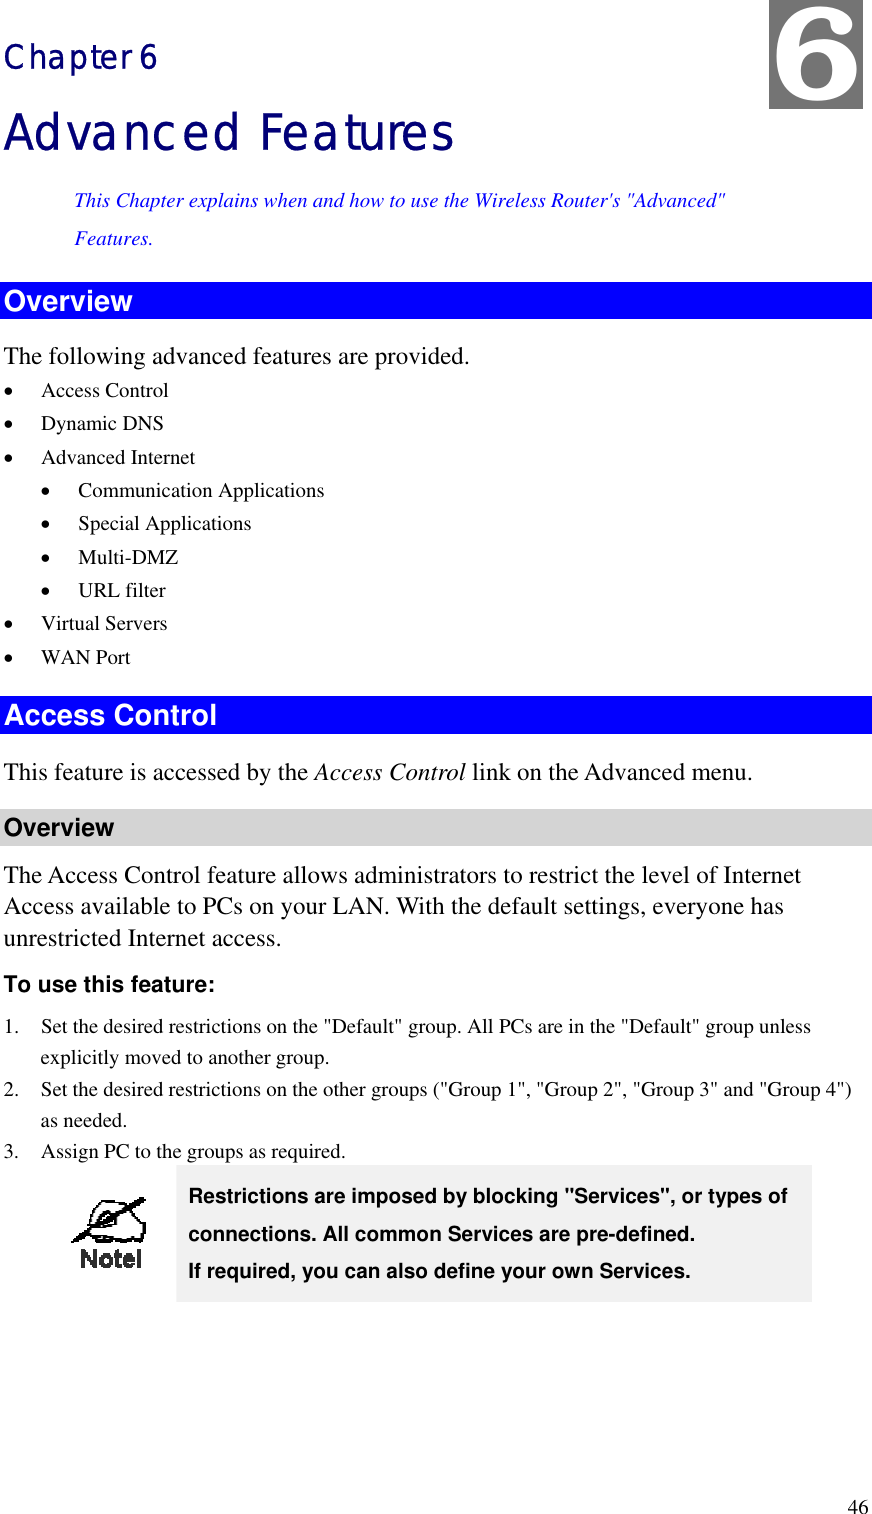 6 Chapter 6 Advanced Features This Chapter explains when and how to use the Wireless Router&apos;s &quot;Advanced&quot; Features. Overview The following advanced features are provided. •  Access Control •  Dynamic DNS •  Advanced Internet •  Communication Applications •  Special Applications •  Multi-DMZ •  URL filter •  Virtual Servers •  WAN Port Access Control This feature is accessed by the Access Control link on the Advanced menu. Overview The Access Control feature allows administrators to restrict the level of Internet Access available to PCs on your LAN. With the default settings, everyone has unrestricted Internet access. To use this feature: 1.  Set the desired restrictions on the &quot;Default&quot; group. All PCs are in the &quot;Default&quot; group unless explicitly moved to another group. 2.  Set the desired restrictions on the other groups (&quot;Group 1&quot;, &quot;Group 2&quot;, &quot;Group 3&quot; and &quot;Group 4&quot;) as needed. 3.  Assign PC to the groups as required.  Restrictions are imposed by blocking &quot;Services&quot;, or types of connections. All common Services are pre-defined.   If required, you can also define your own Services.  46 